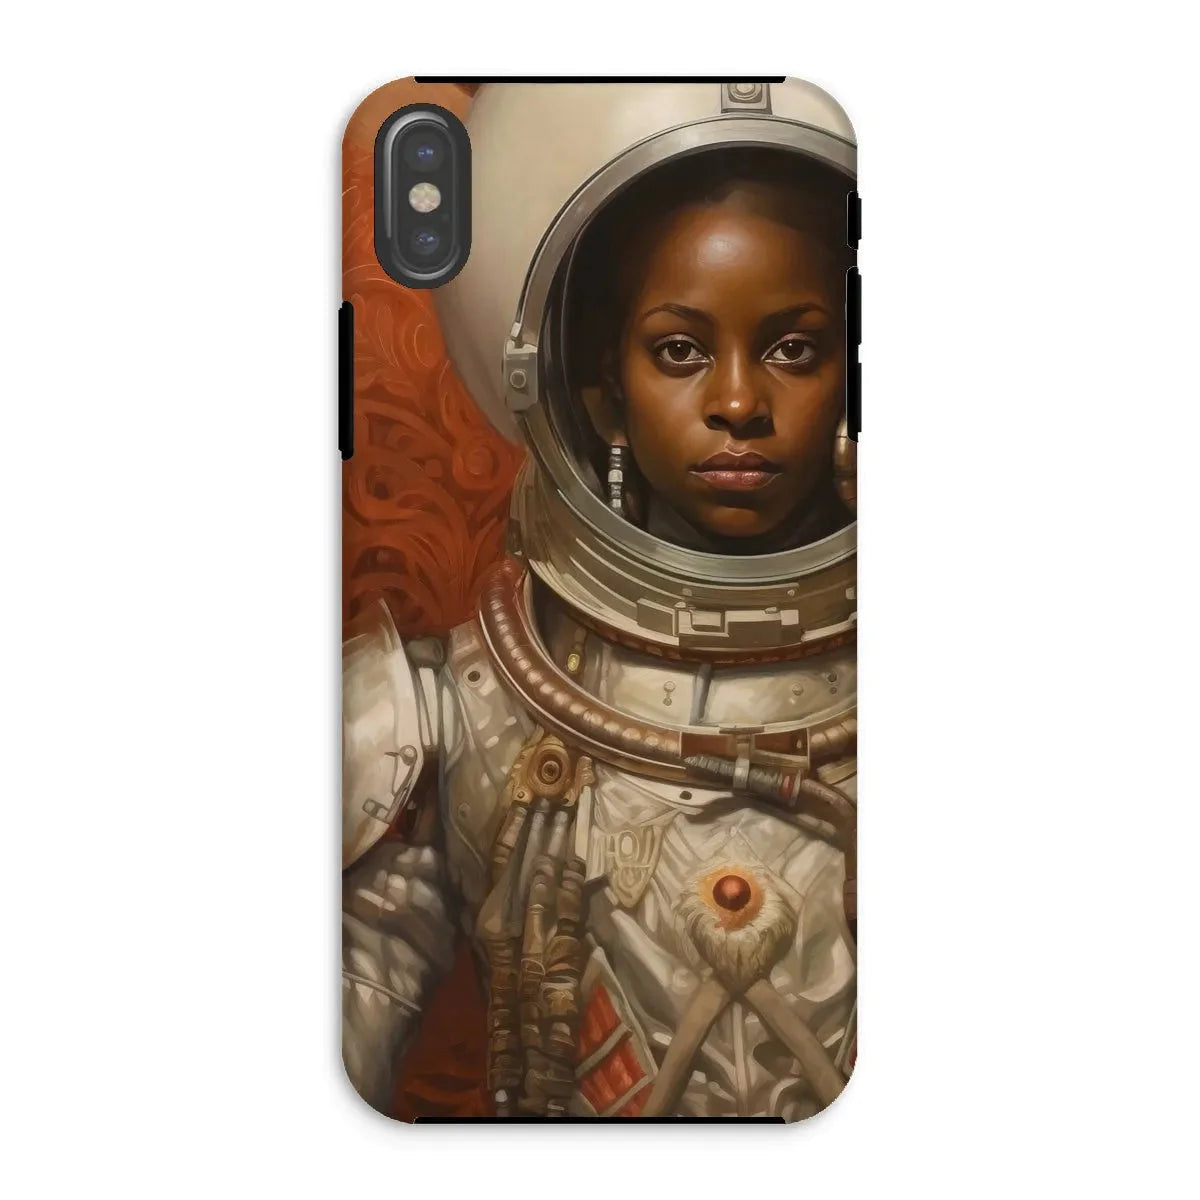 Ava The Lesbian Astronaut - Sapphic Aesthetic Phone Case - Iphone Xs / Matte - Mobile Phone Cases - Aesthetic Art